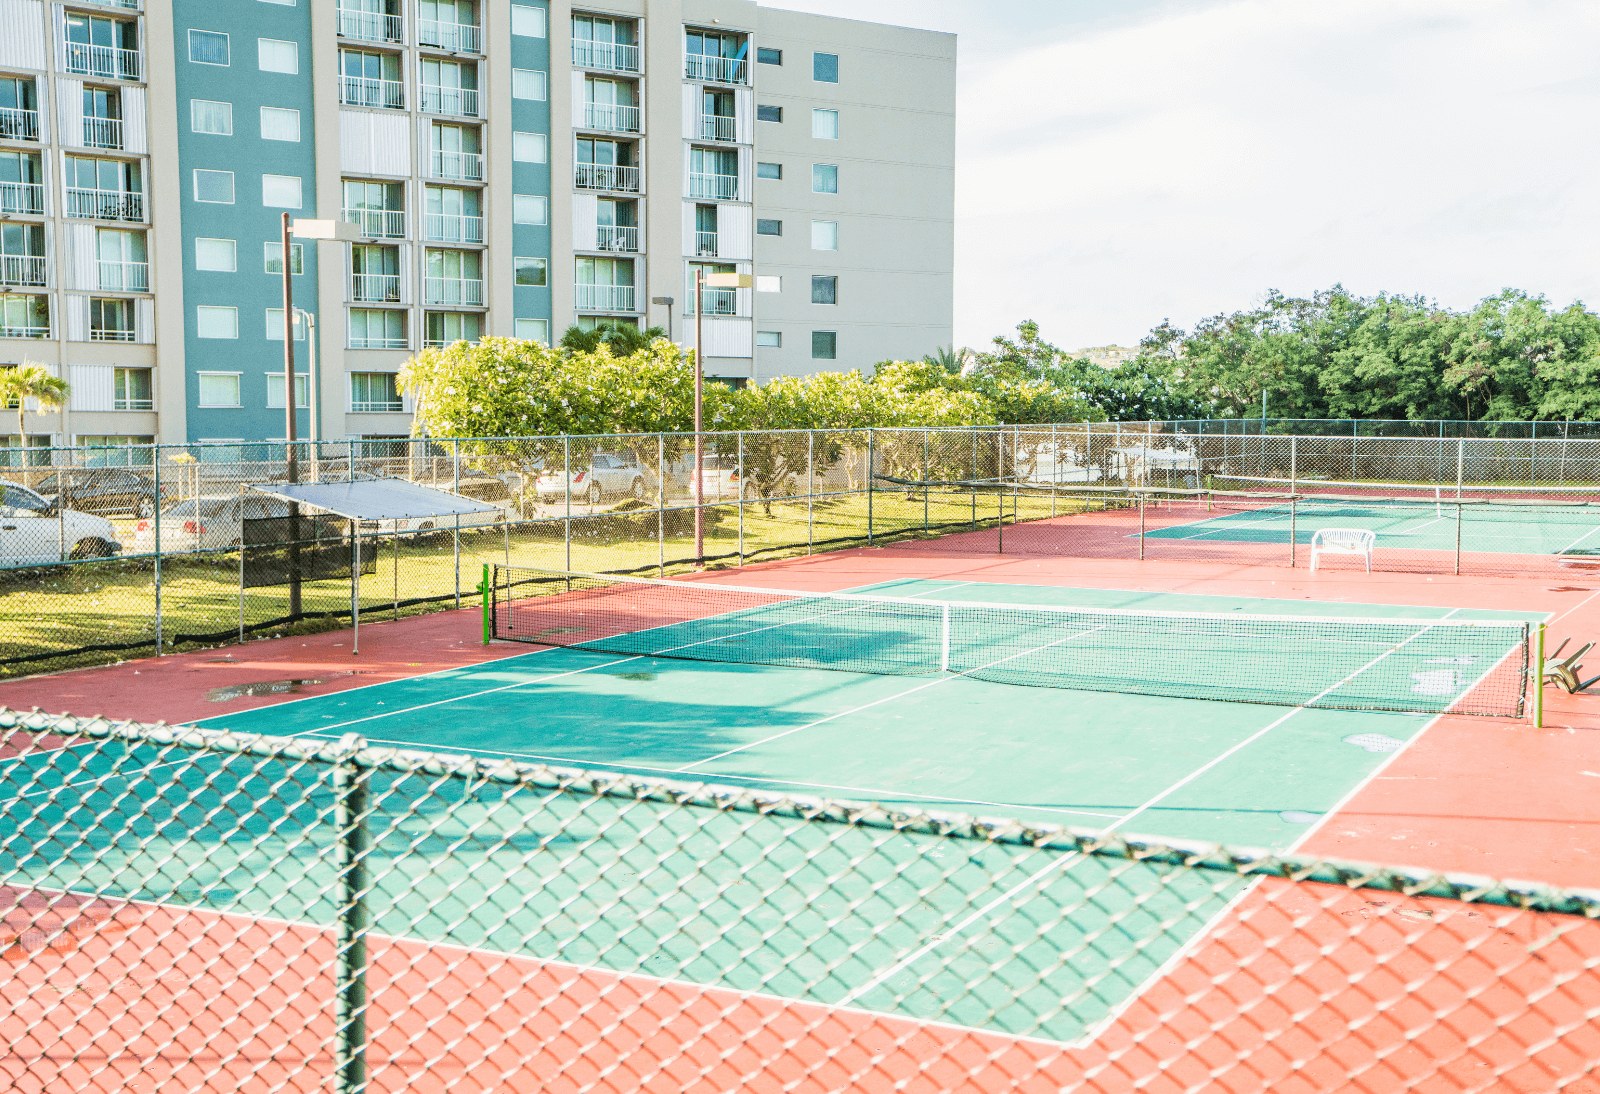 A tennis court outside of a hotel